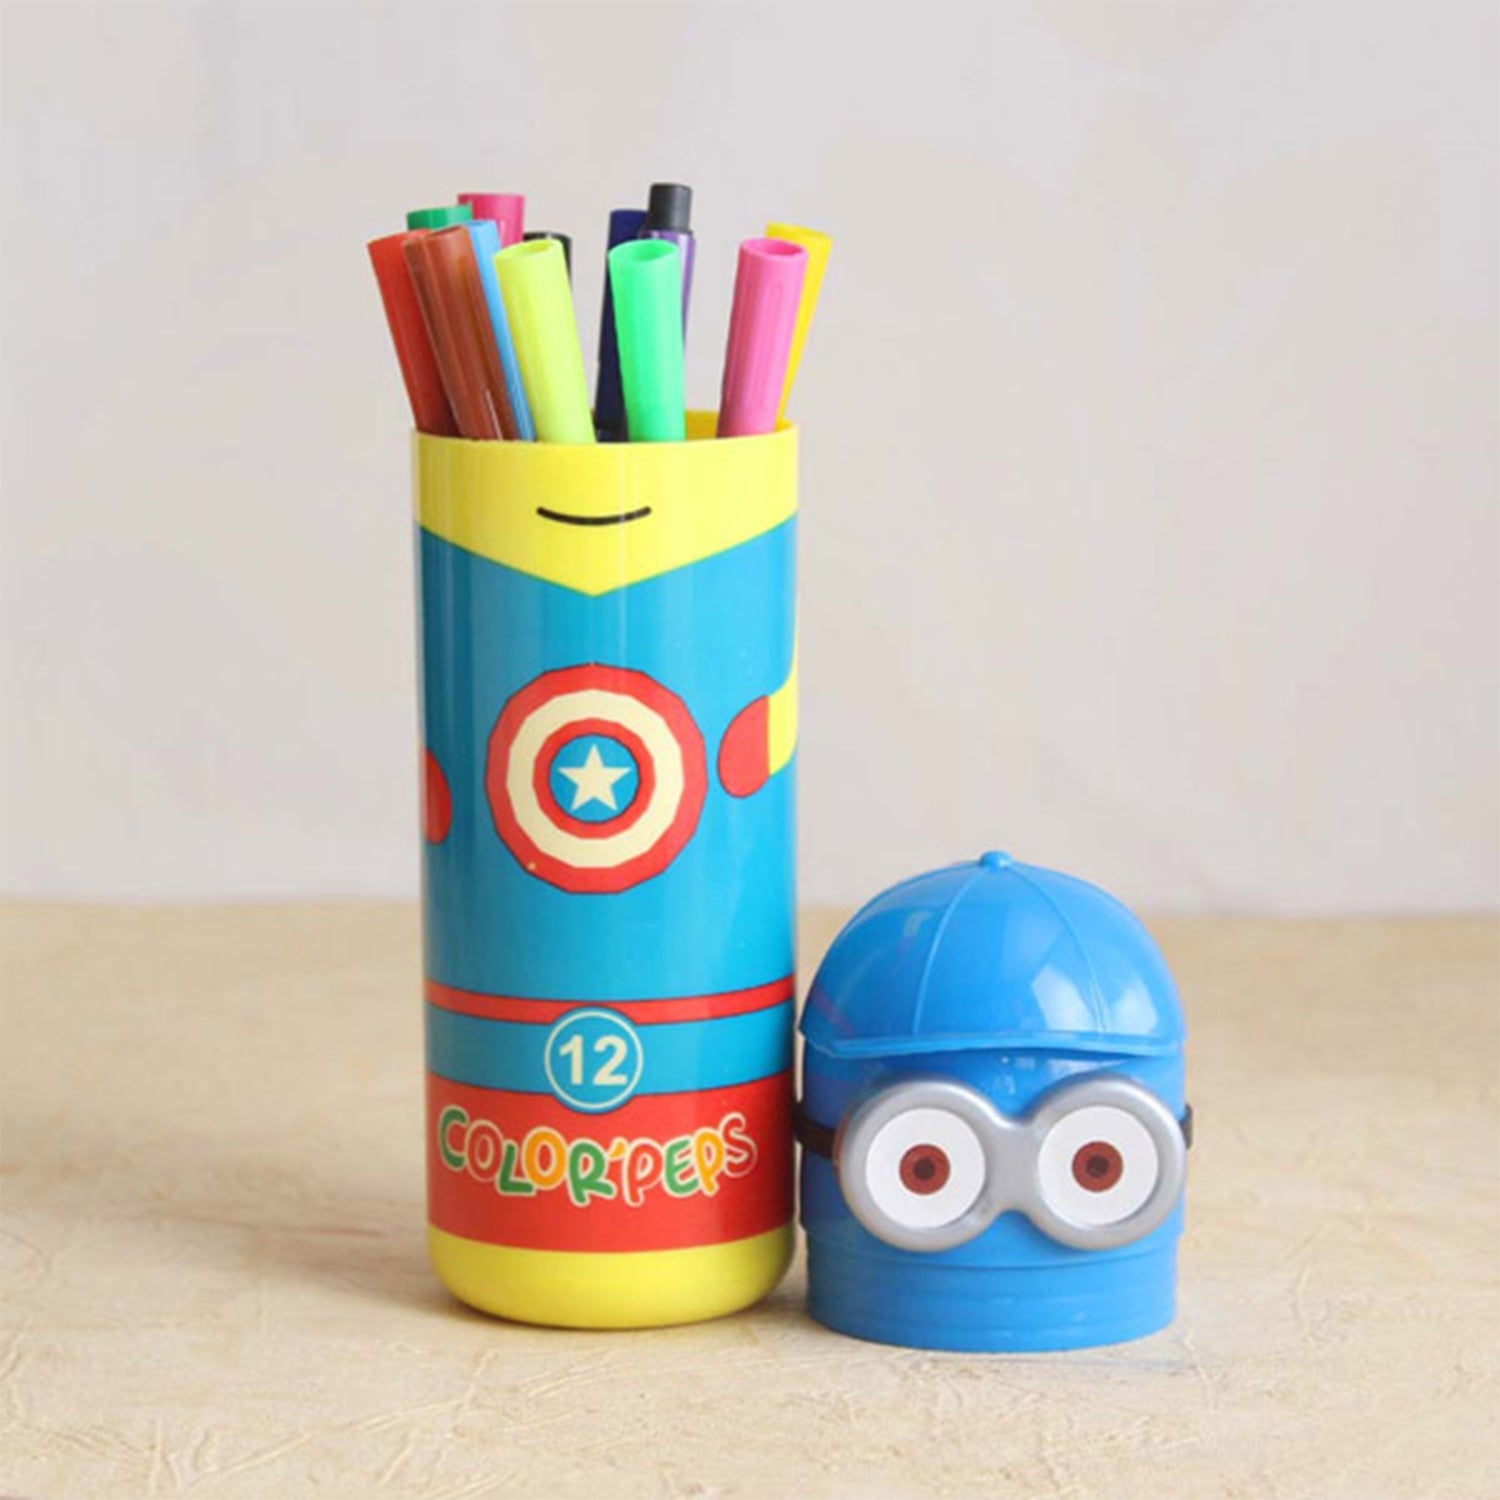 6175 Minions Sketch Pen Set with Attractive Designed Case (Pack of 12)6175_12pen_minions_sketch_box